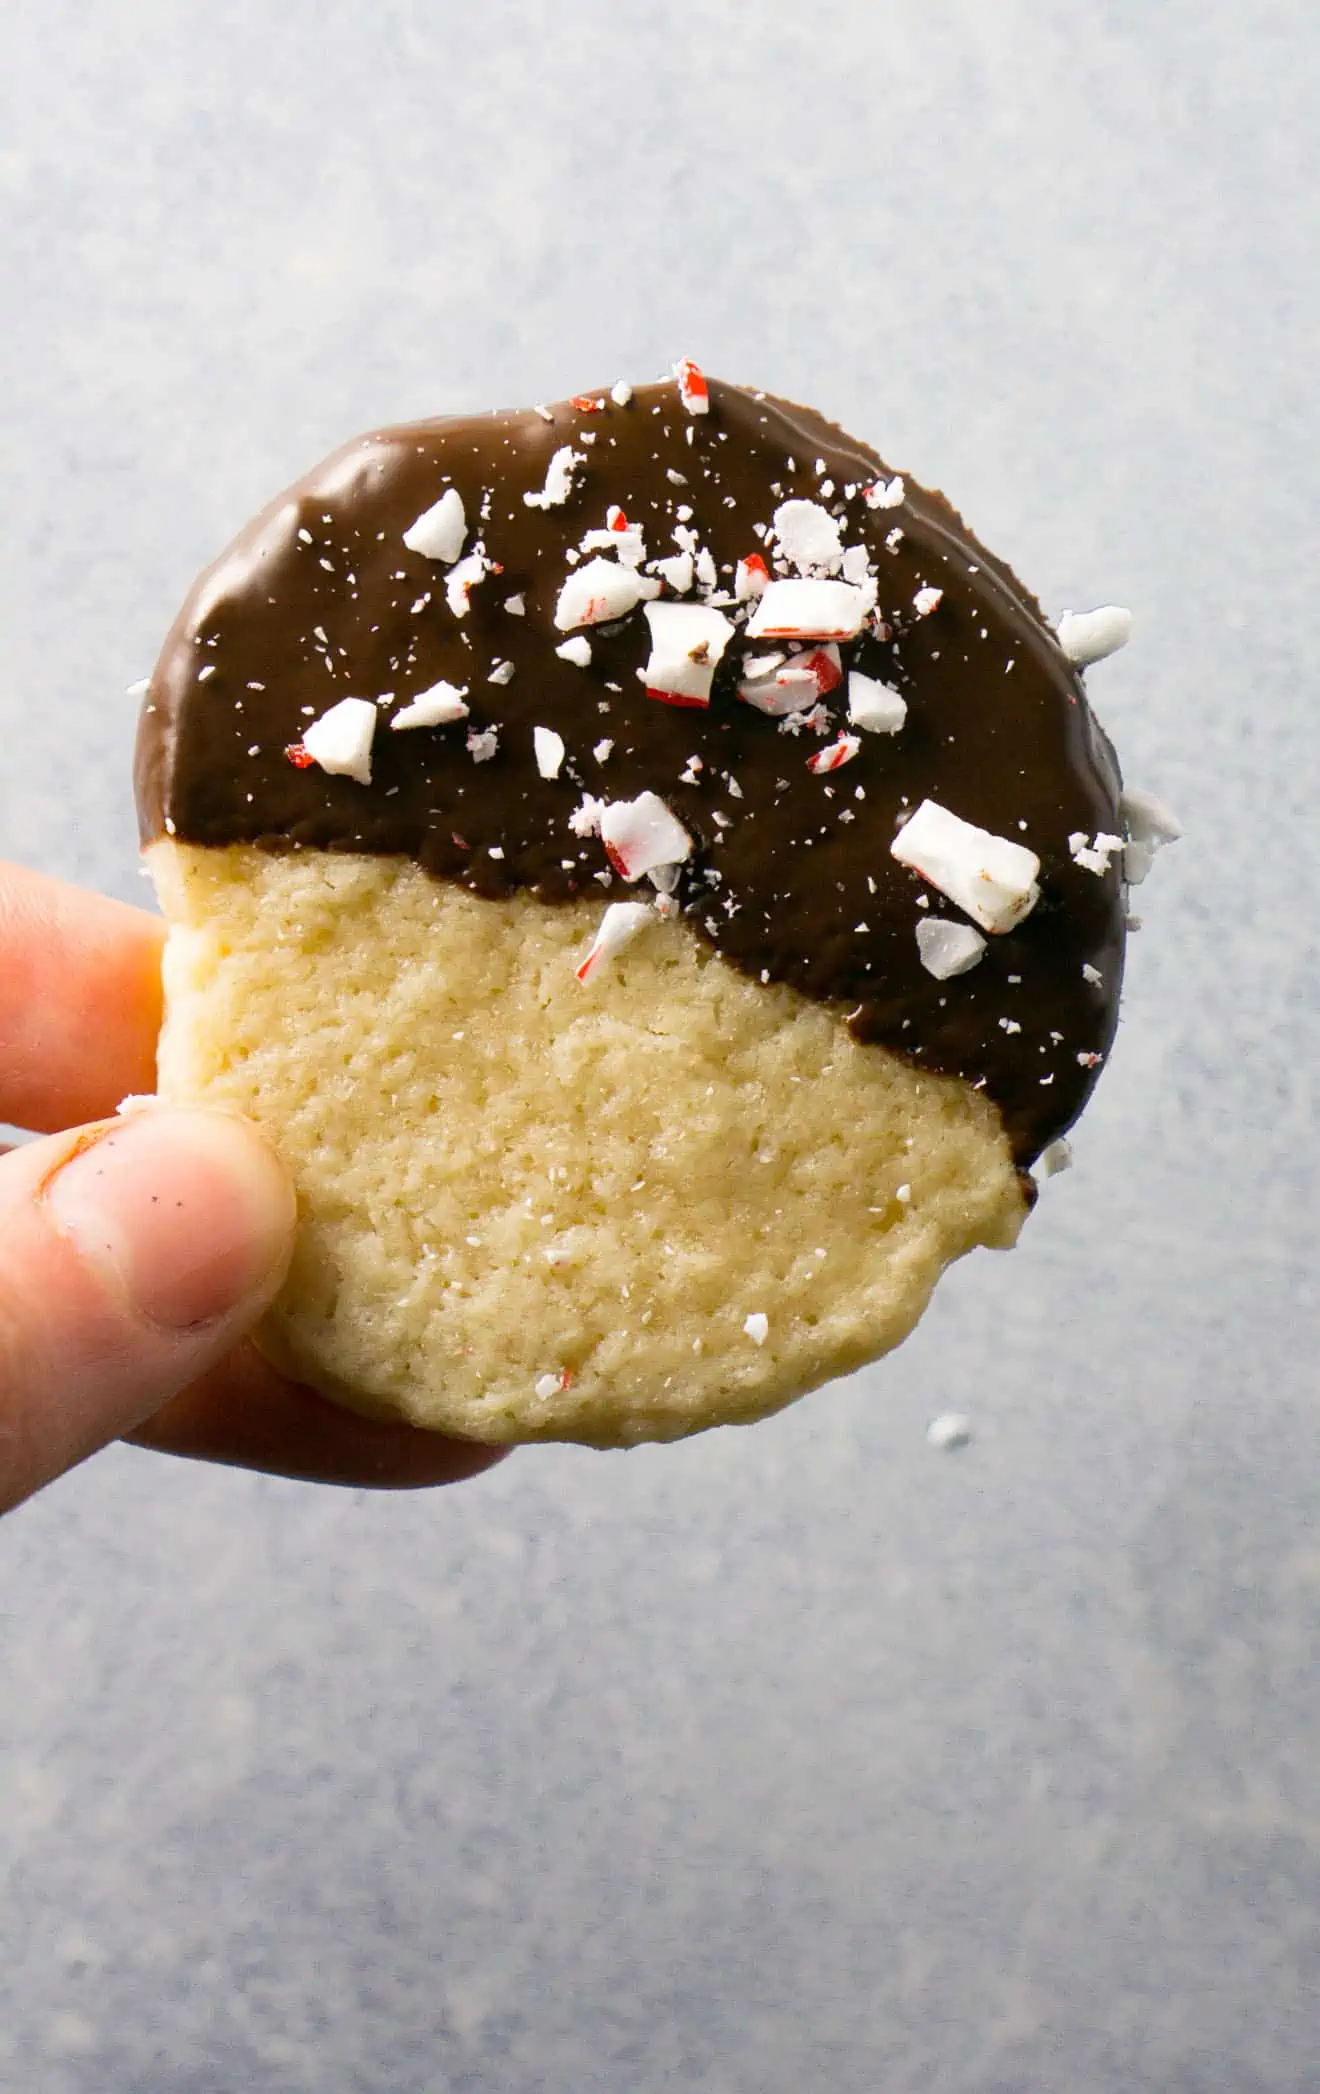 Holding a peppermint flavored shortbread cookie dipped in melted chocolate. 